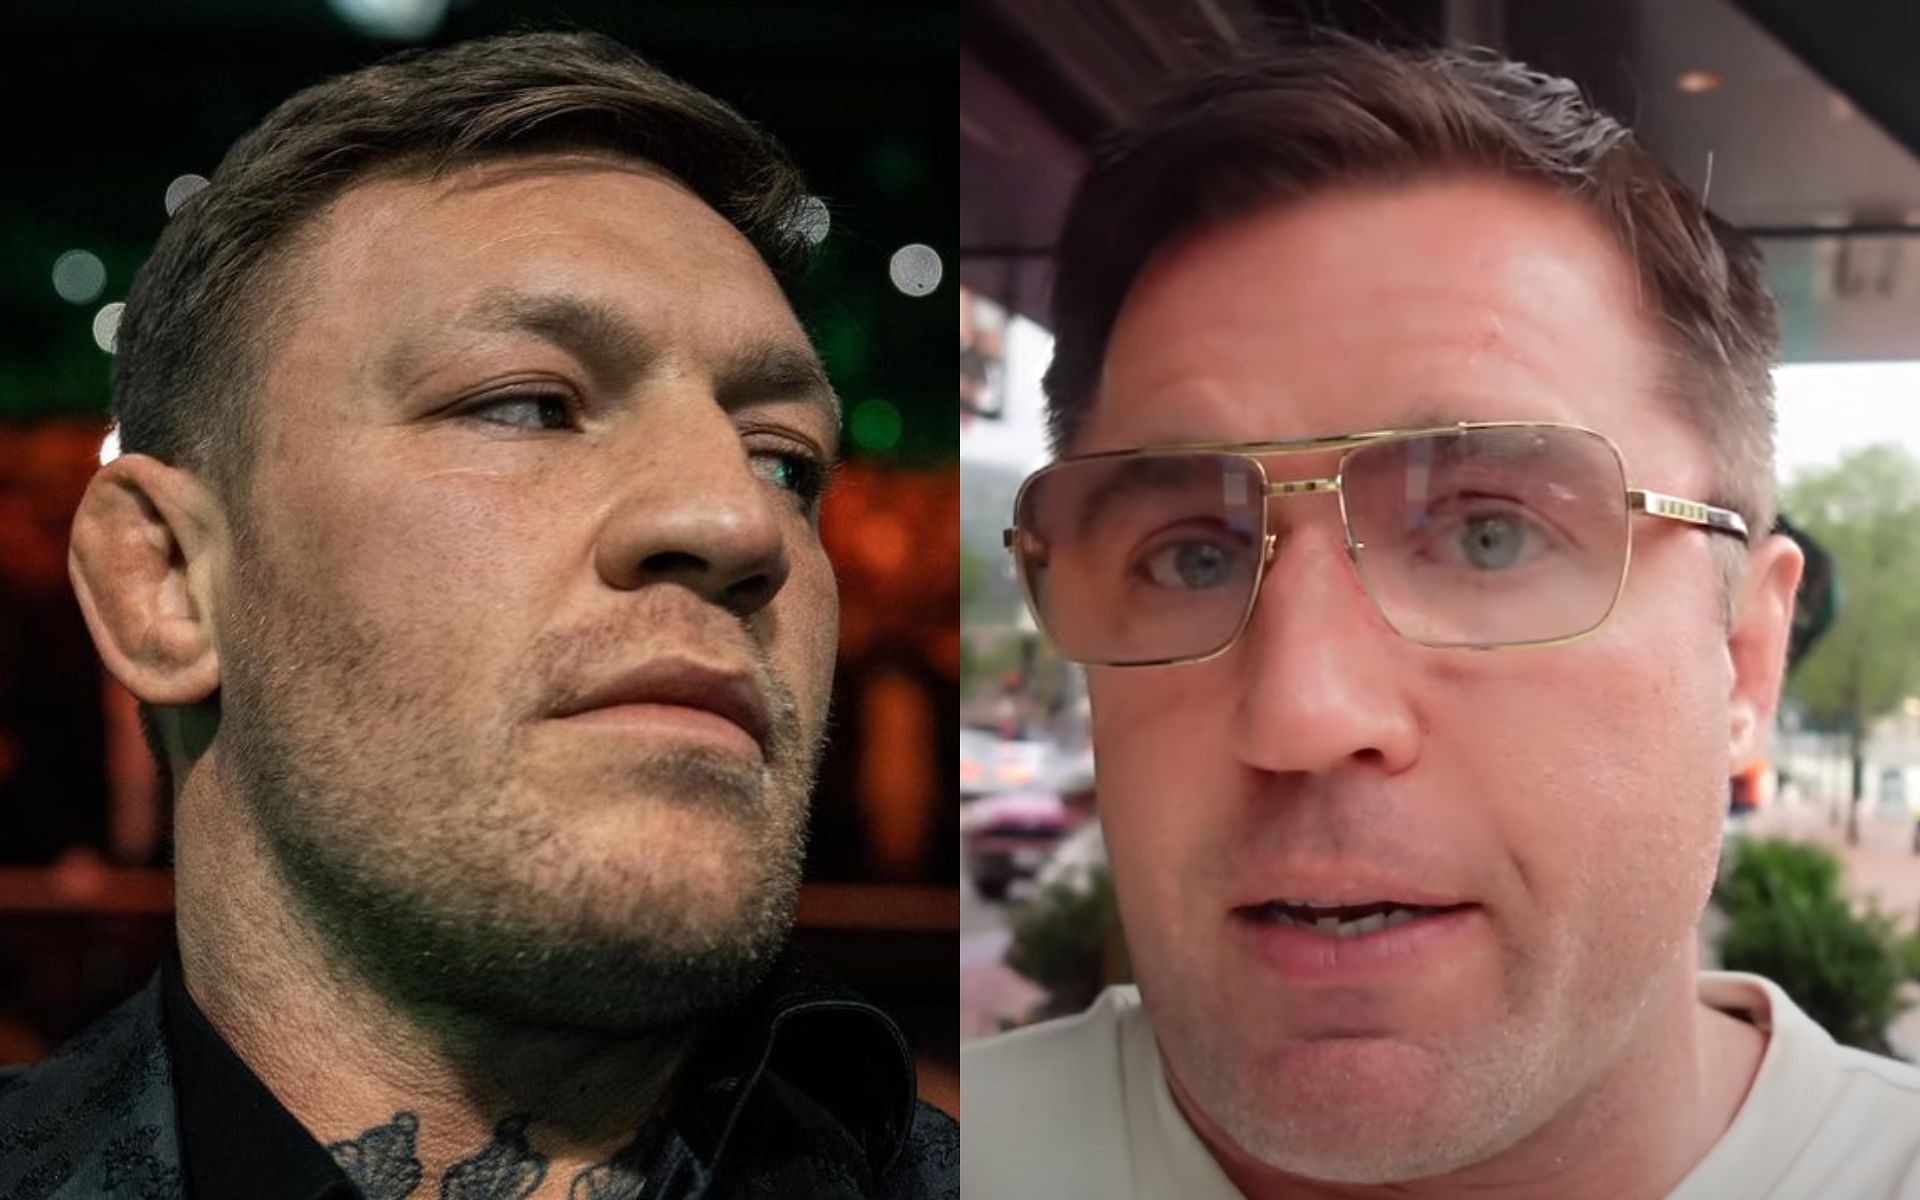 Conor McGregor (Left) and Chael Sonnen (Right) [*Image courtesy: @thenotoriousmma Instagram and Chael Sonnen YouTube channel]